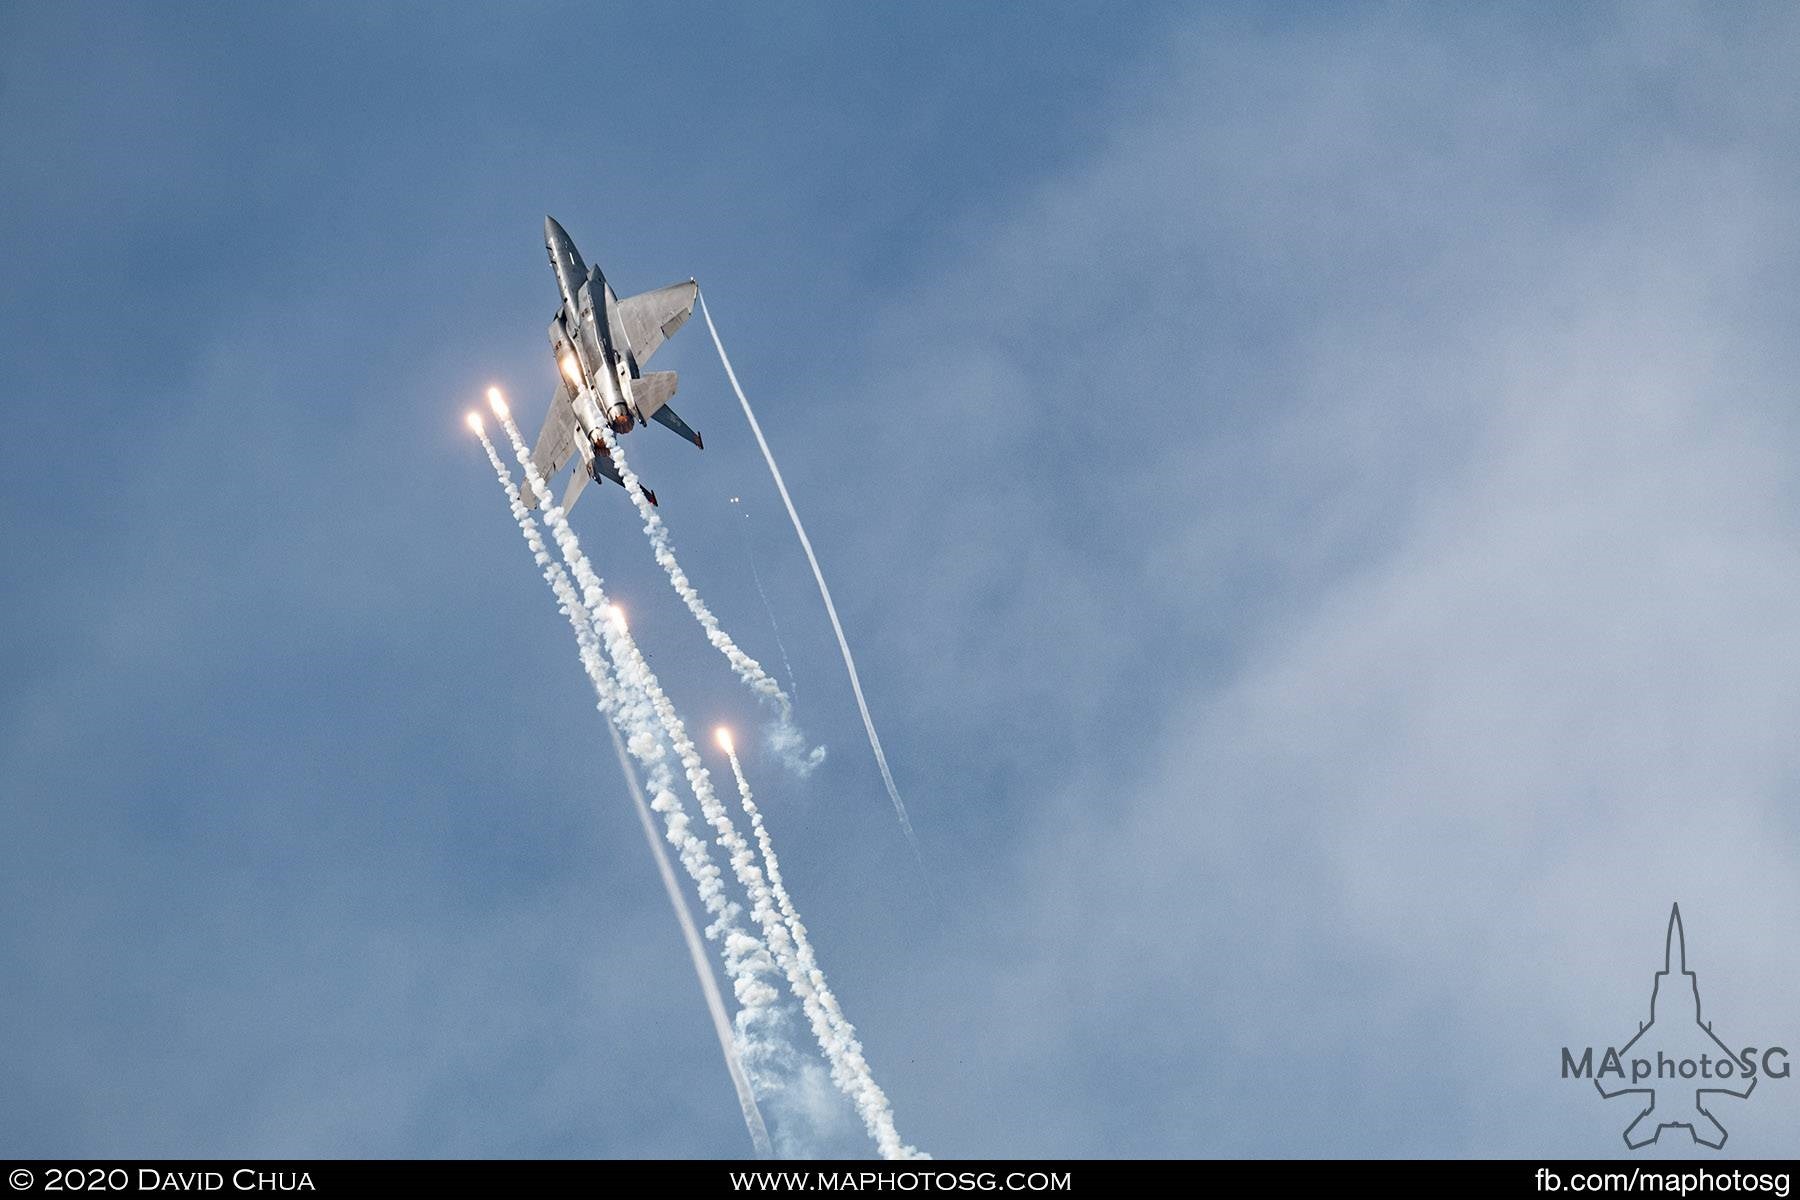 RSAF F-15SG dispensing flares as it goes veritical in the finale of the aerial display performance